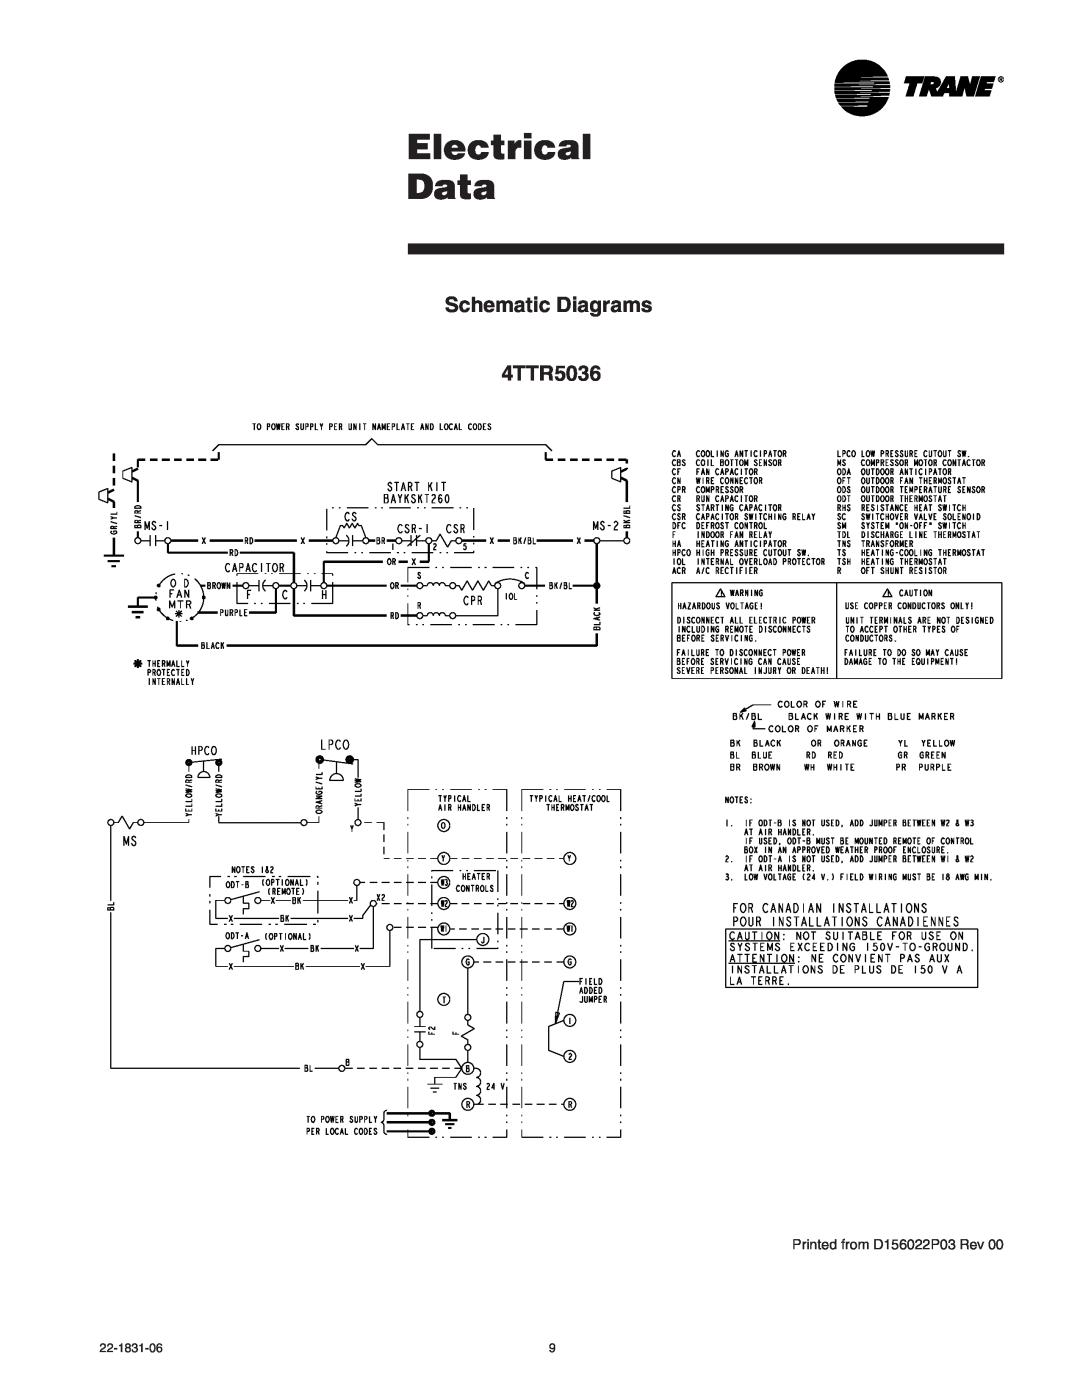 Trane XR15 manual Electrical Data, Schematic Diagrams 4TTR5036, Printed from D156022P03 Rev 